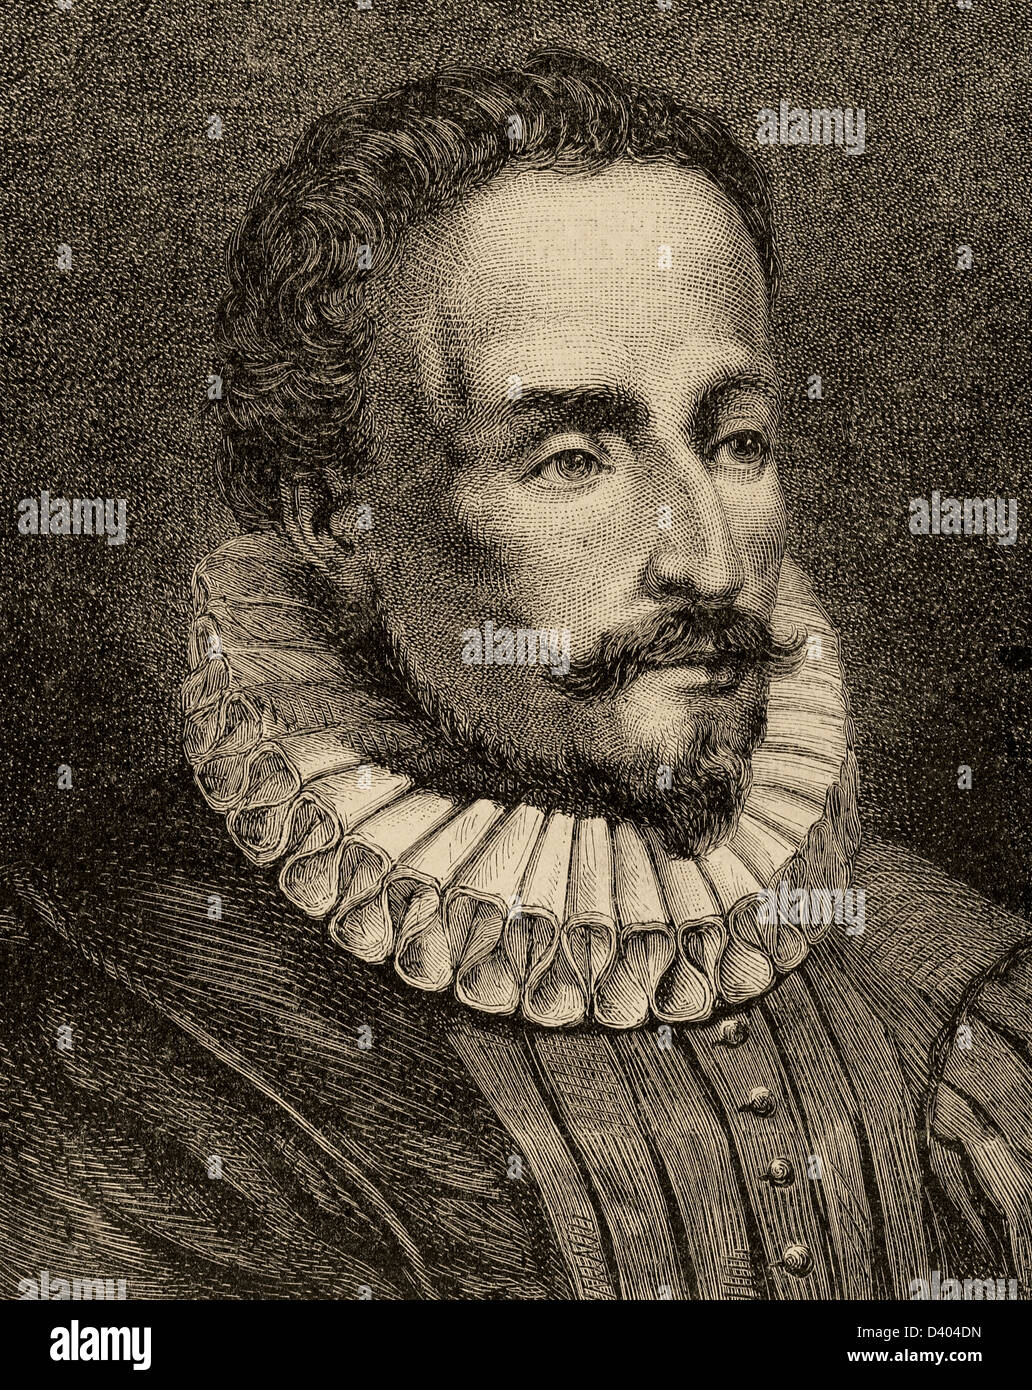 Miguel de Cervantes (1547-1616). Spanish writer. Engraving by Capuz in The Spanish and American Illustration, 1872. Stock Photo